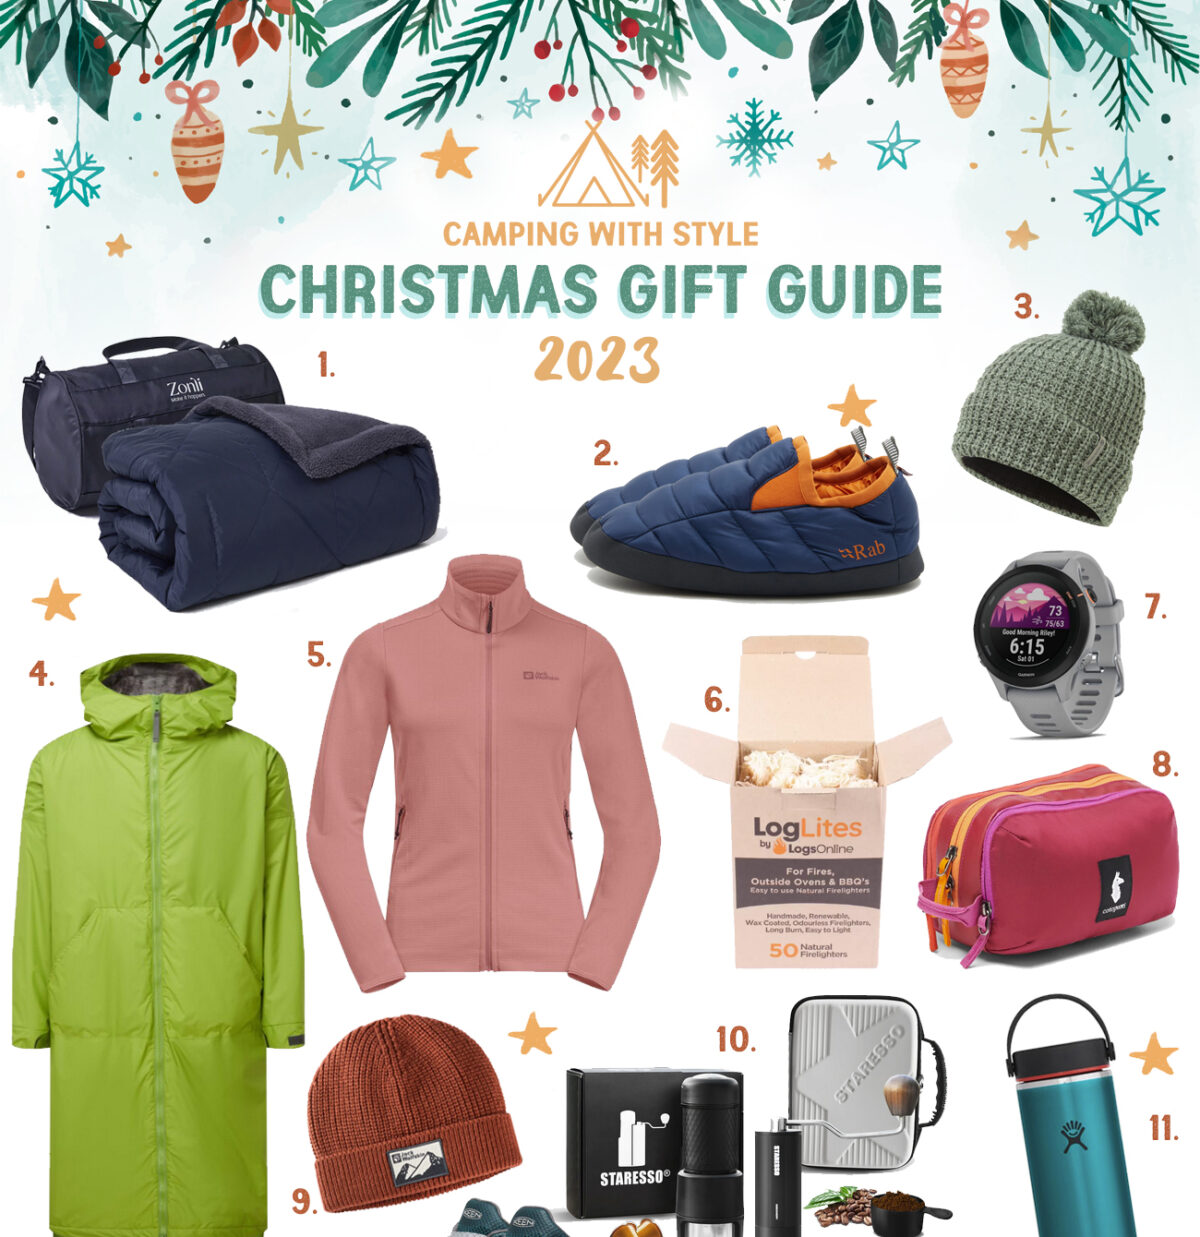 The Big 2203 Camping & Outdoor Christmas Gift Guide